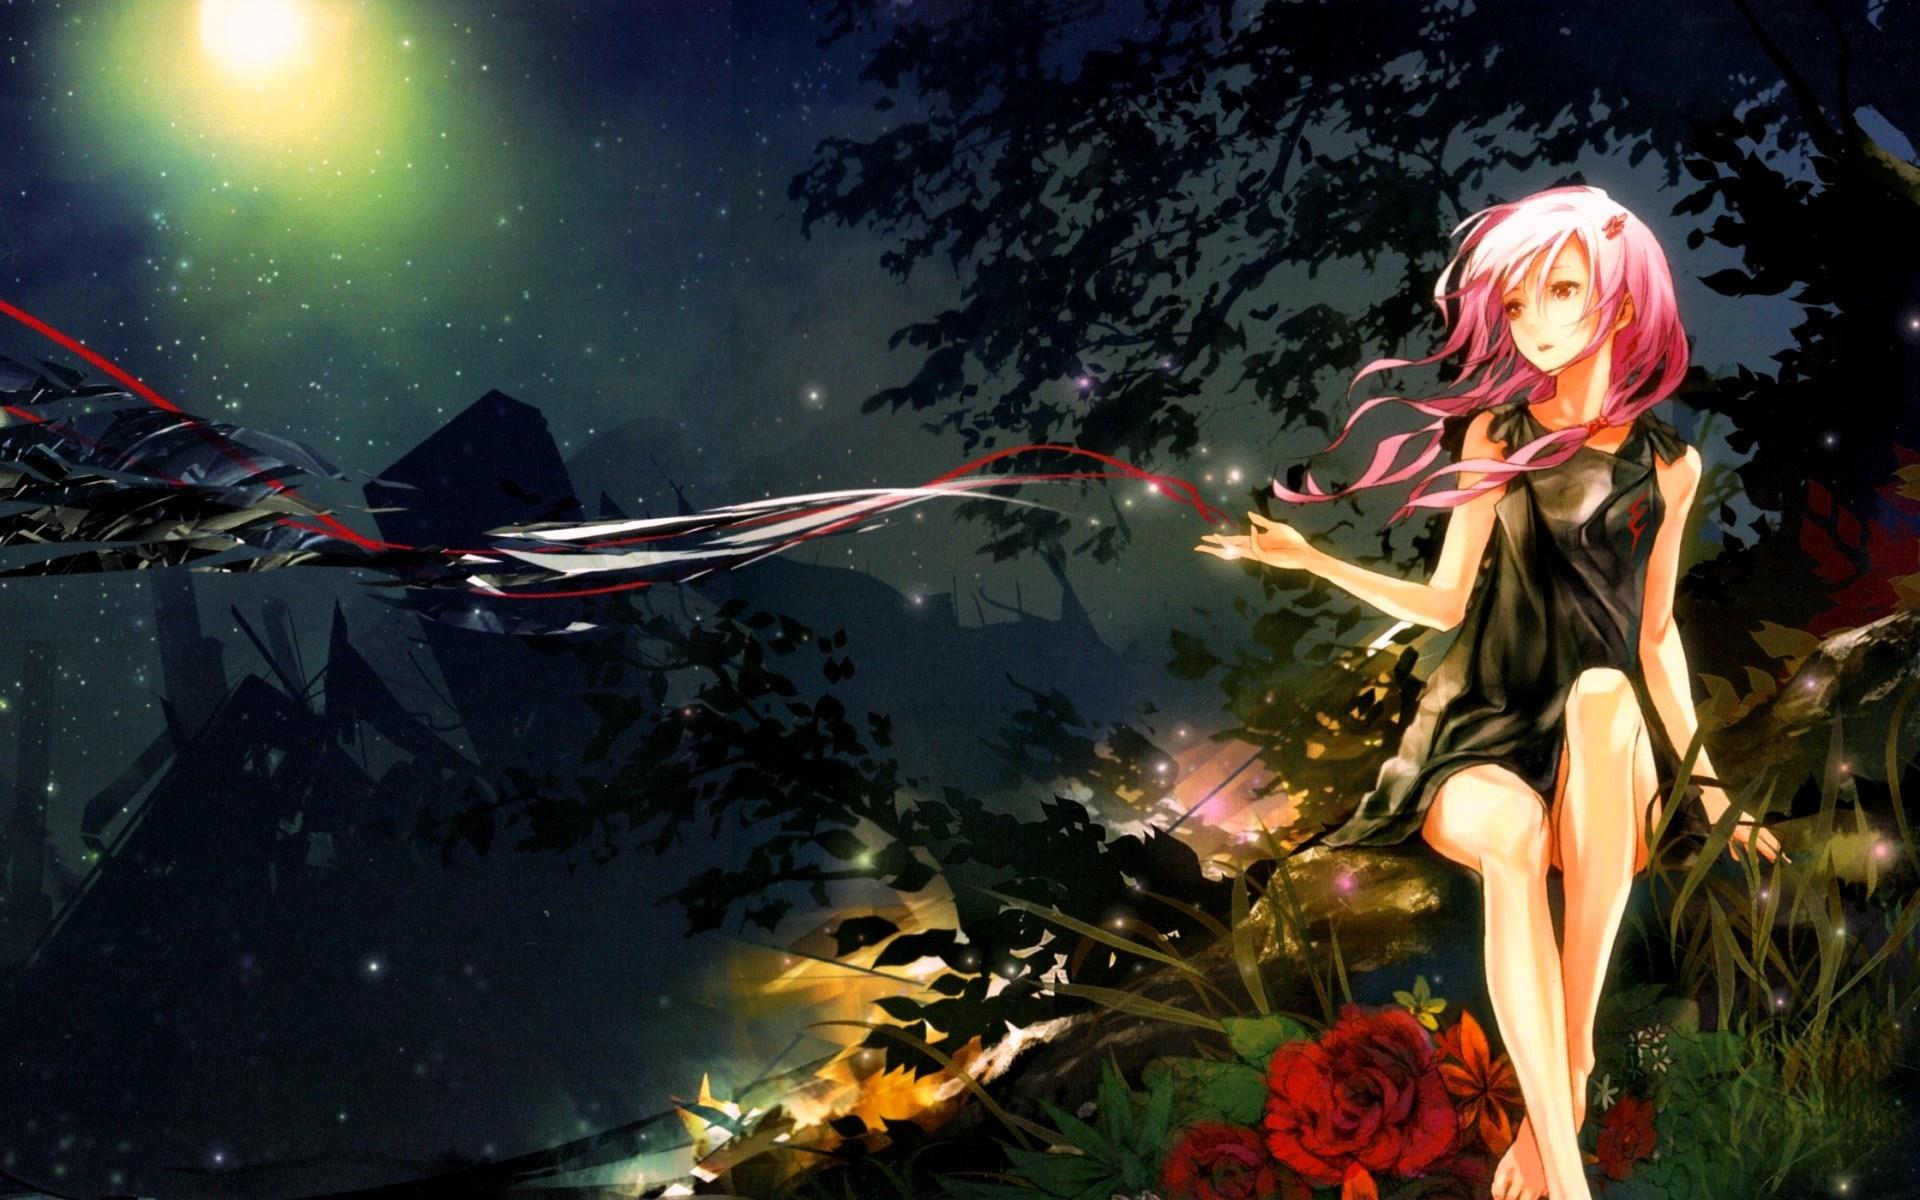 guilty crown streaming download free